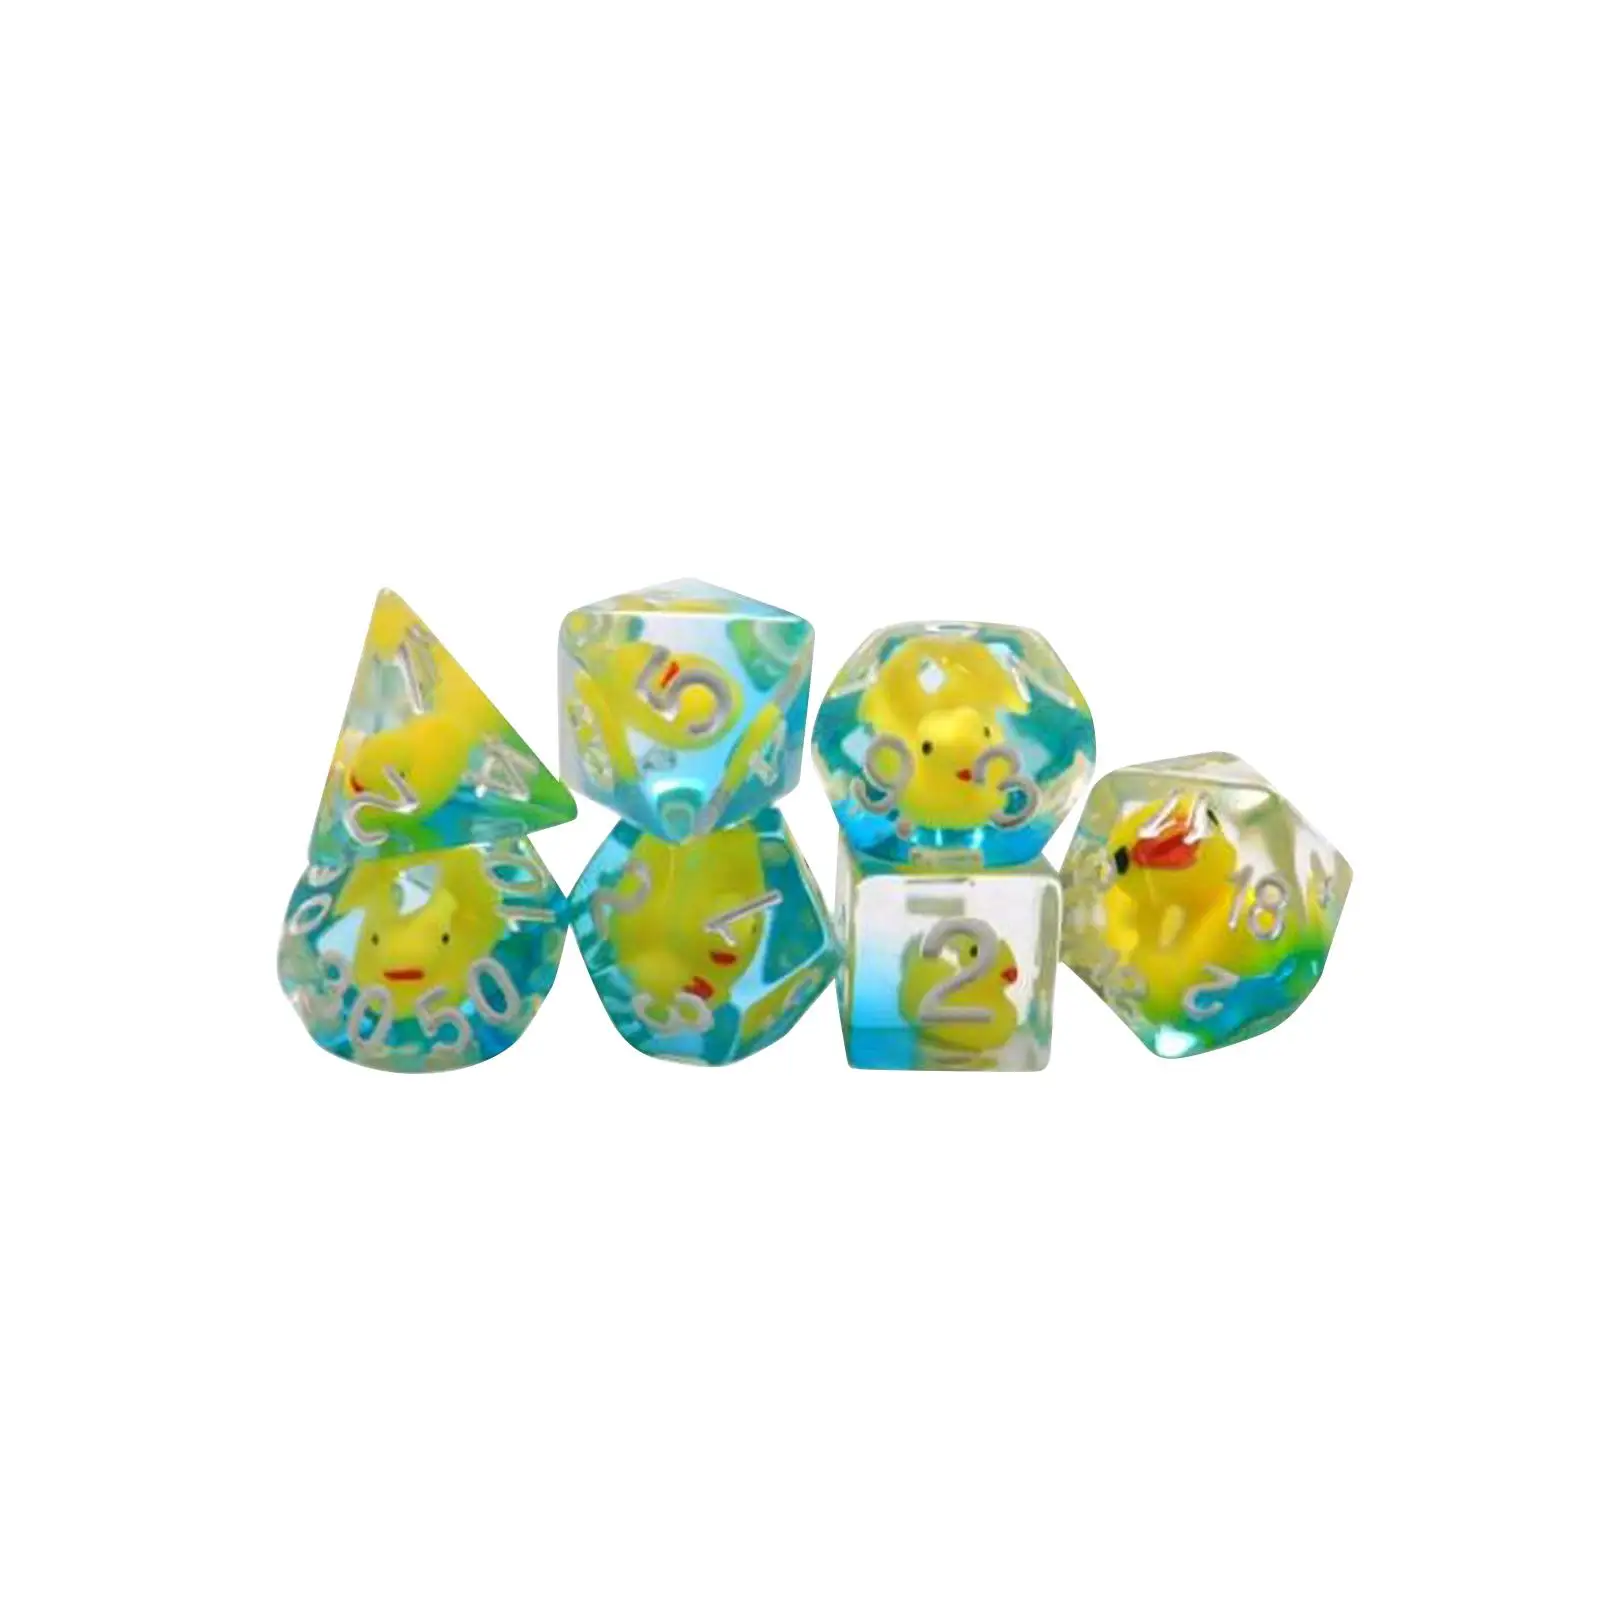 7 Pieces Resin Dices Party Supplies Polyhedral Dices for Bar Party Card Game